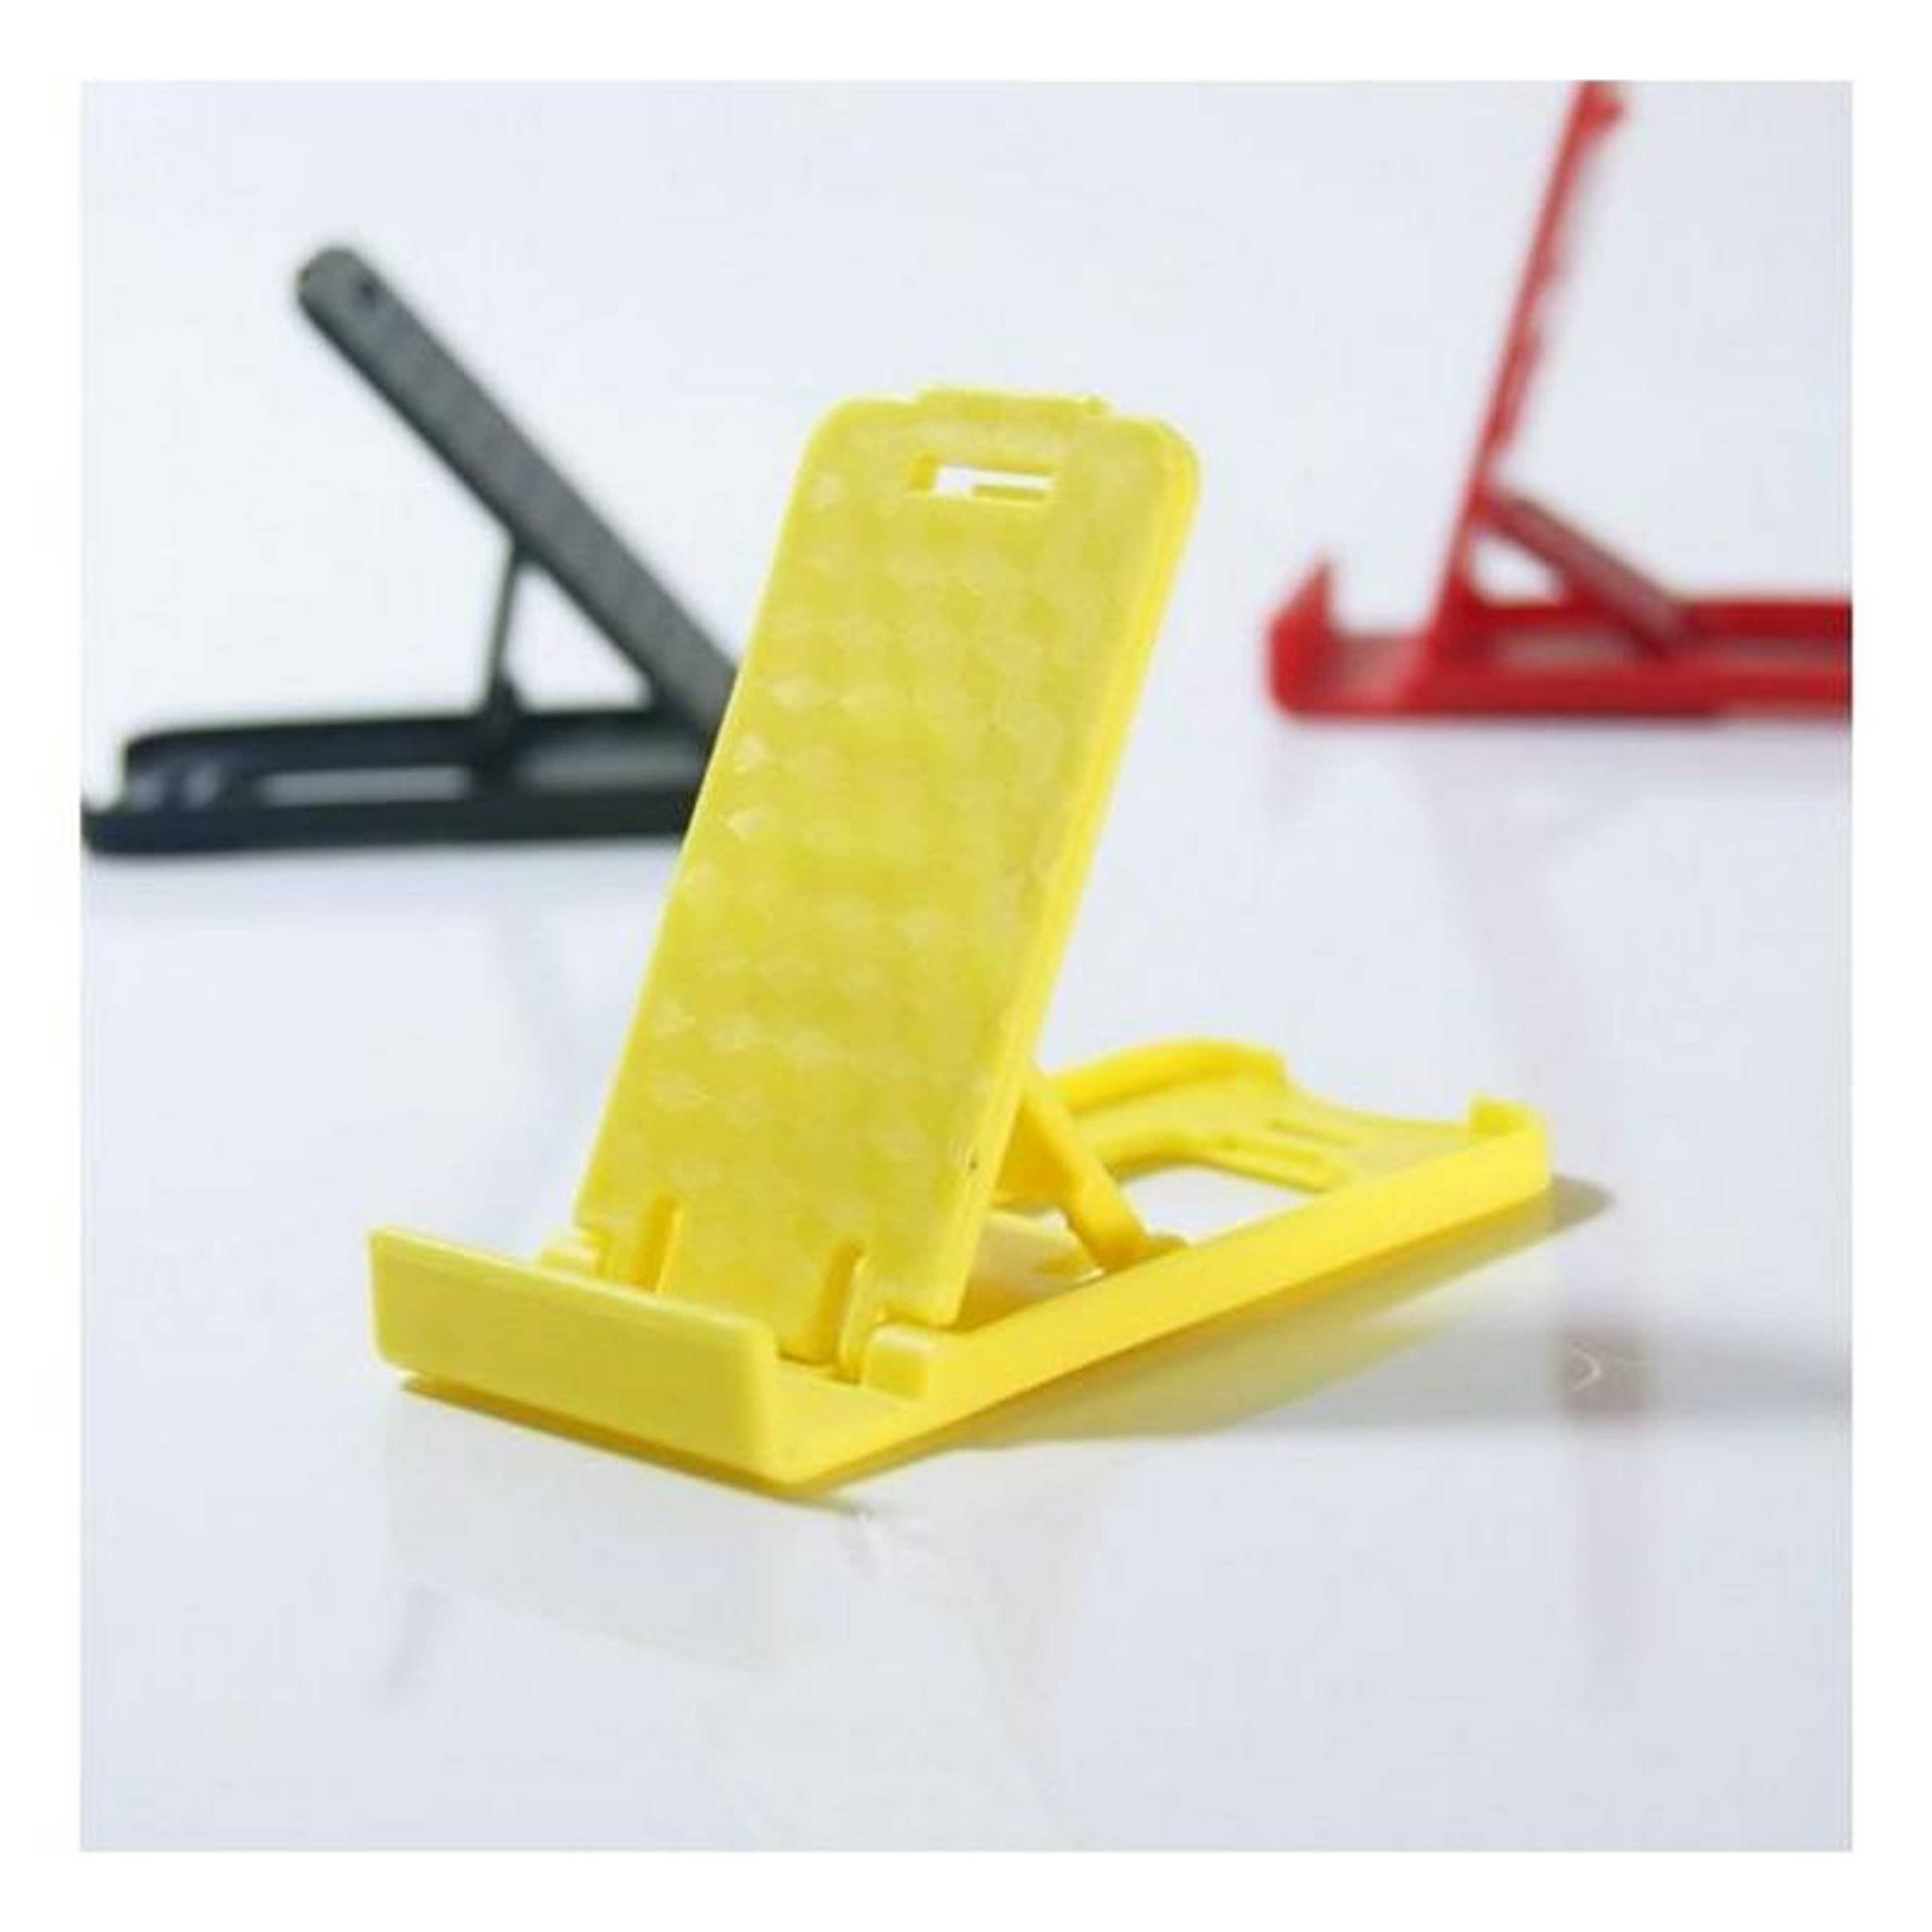 Universal Foldable Mobile Stand Phone Mounts Phone stand Mobile Holder Mini Desk Station grip Mobile Holder Mini Mobile Stand Holder
